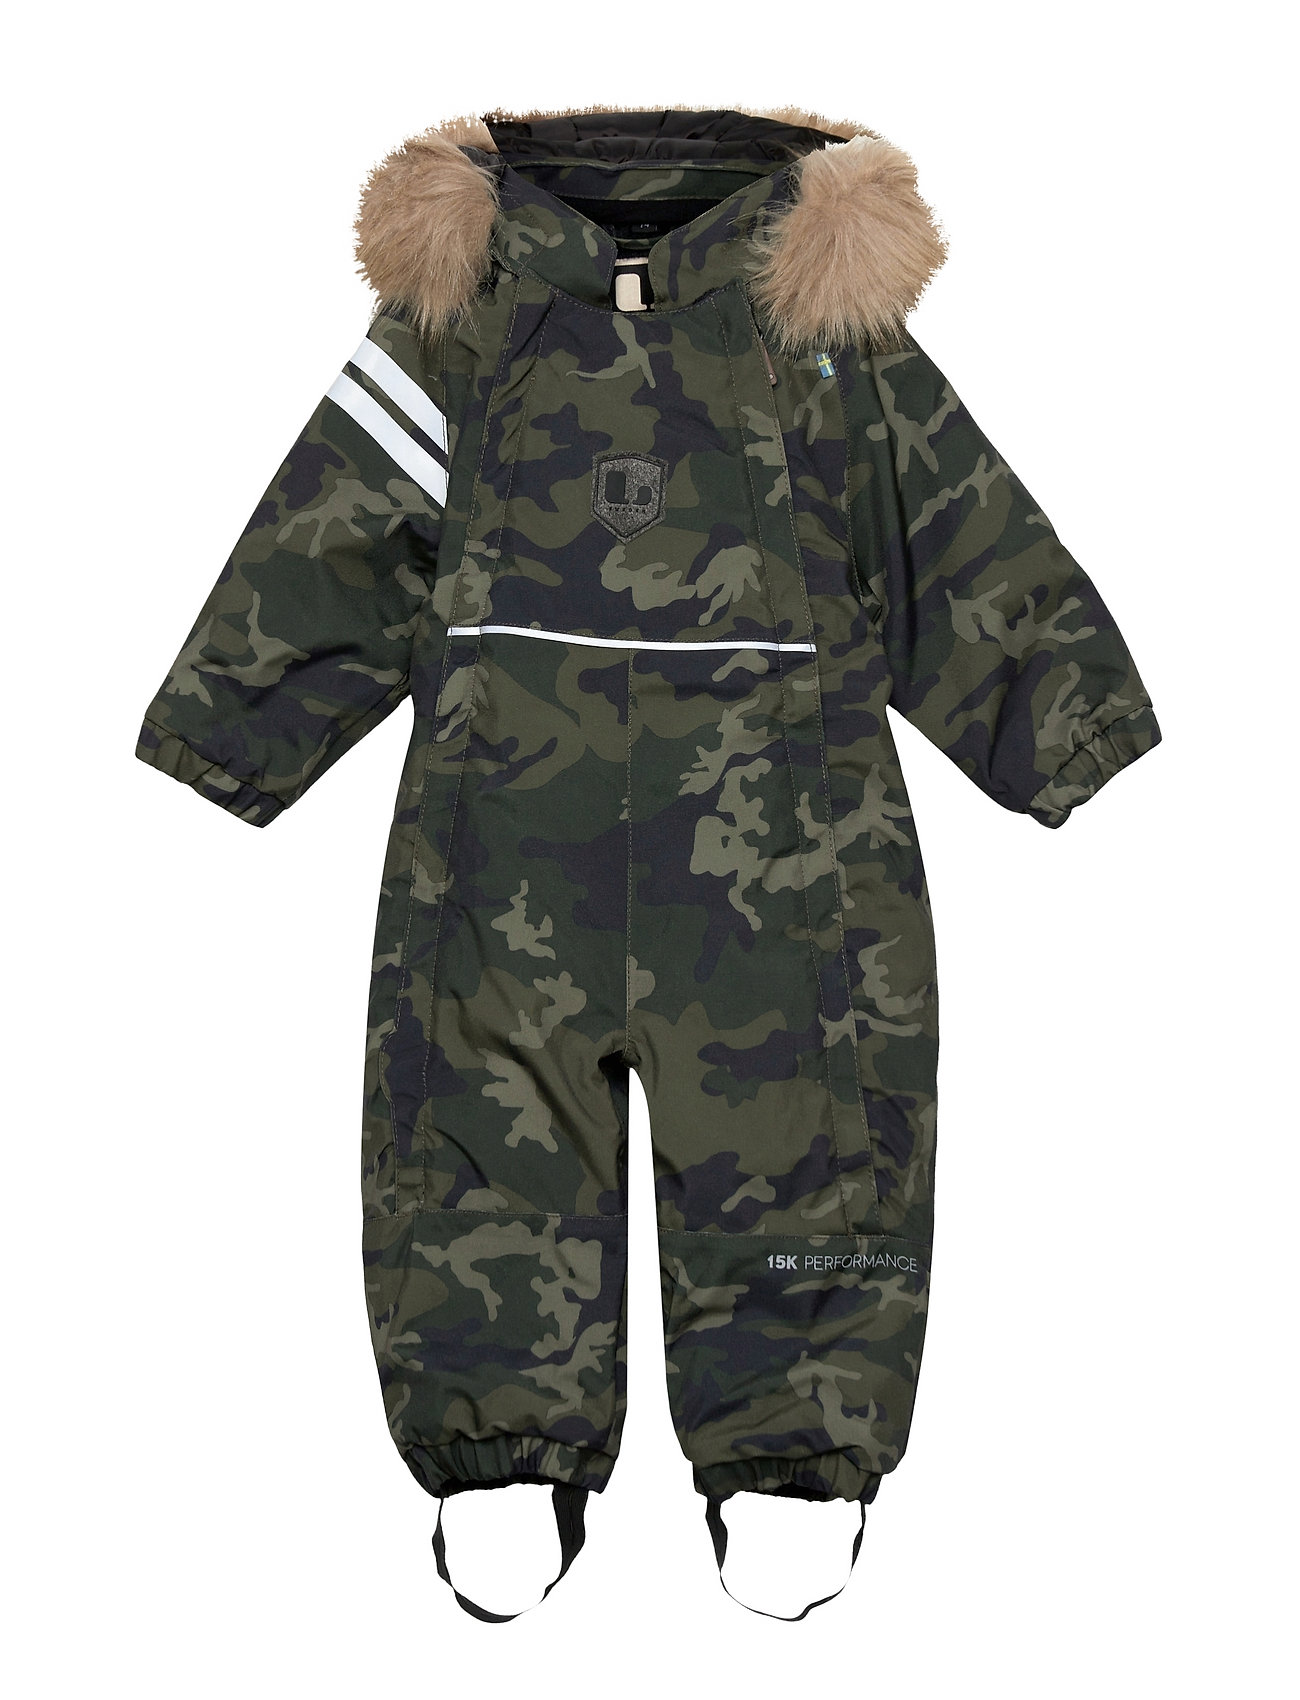 Camo Baby Overall Outerwear Shell Clothing Shell Coveralls Vihreä Lindberg Sweden